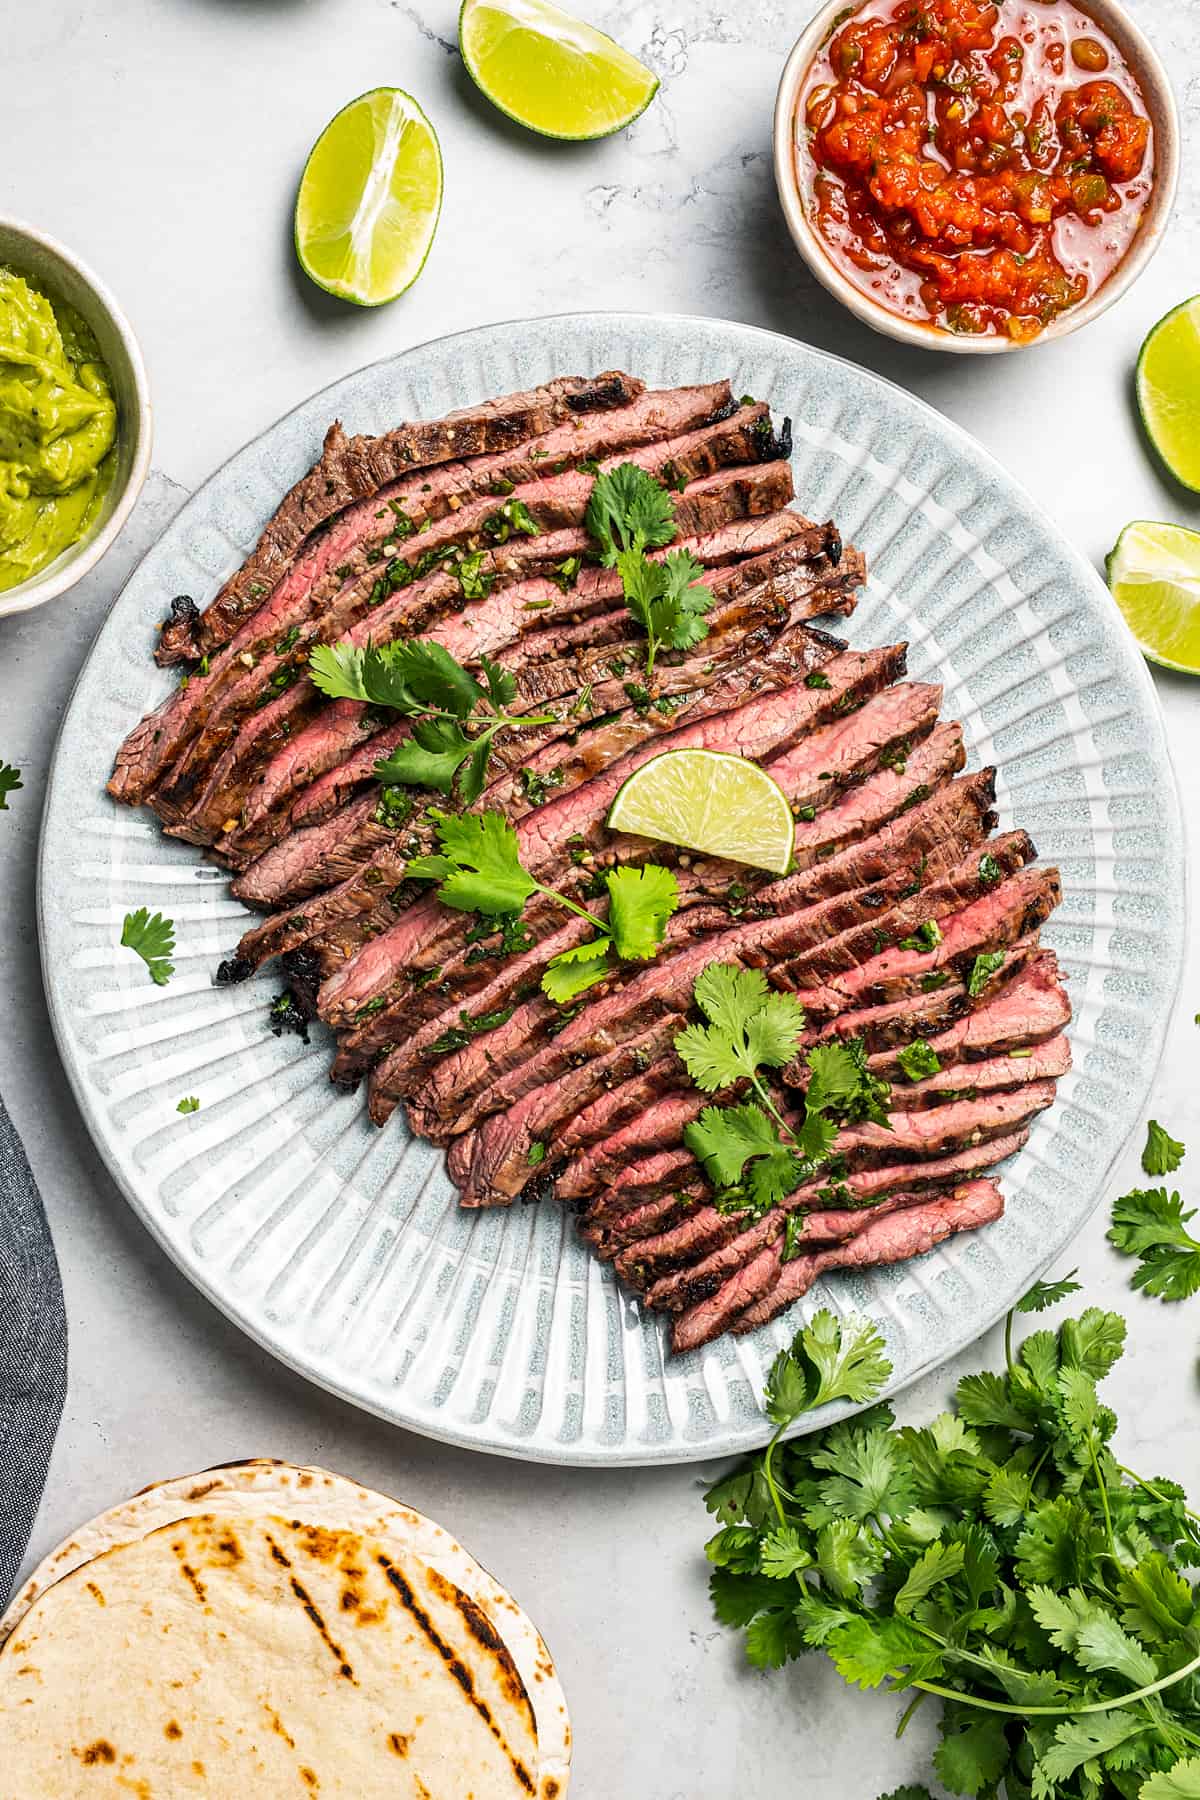 Sliced carne asada on a plate with a serving fork.